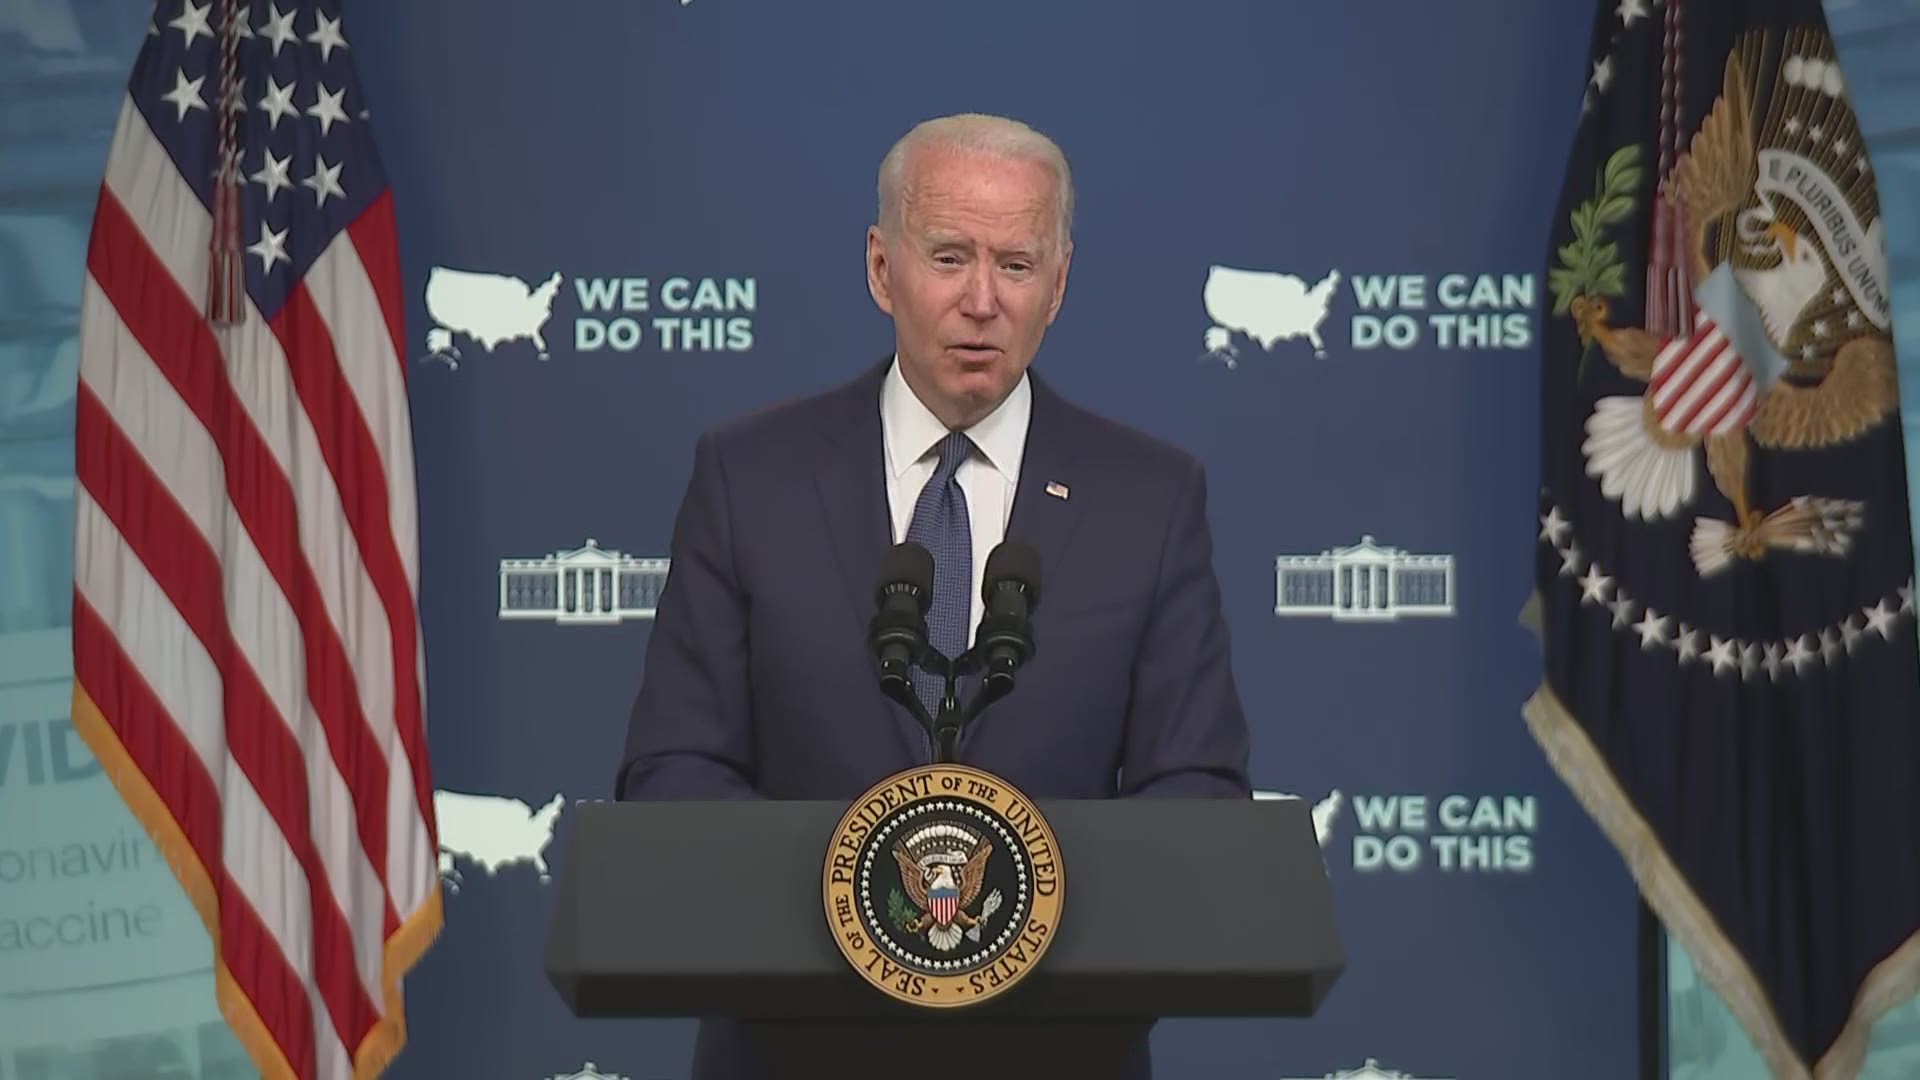 President Biden discussed Tuesday how his administration is stepping up efforts to get kids ages 12 to 18 vaccinated for COVID-19 before they head back to school.